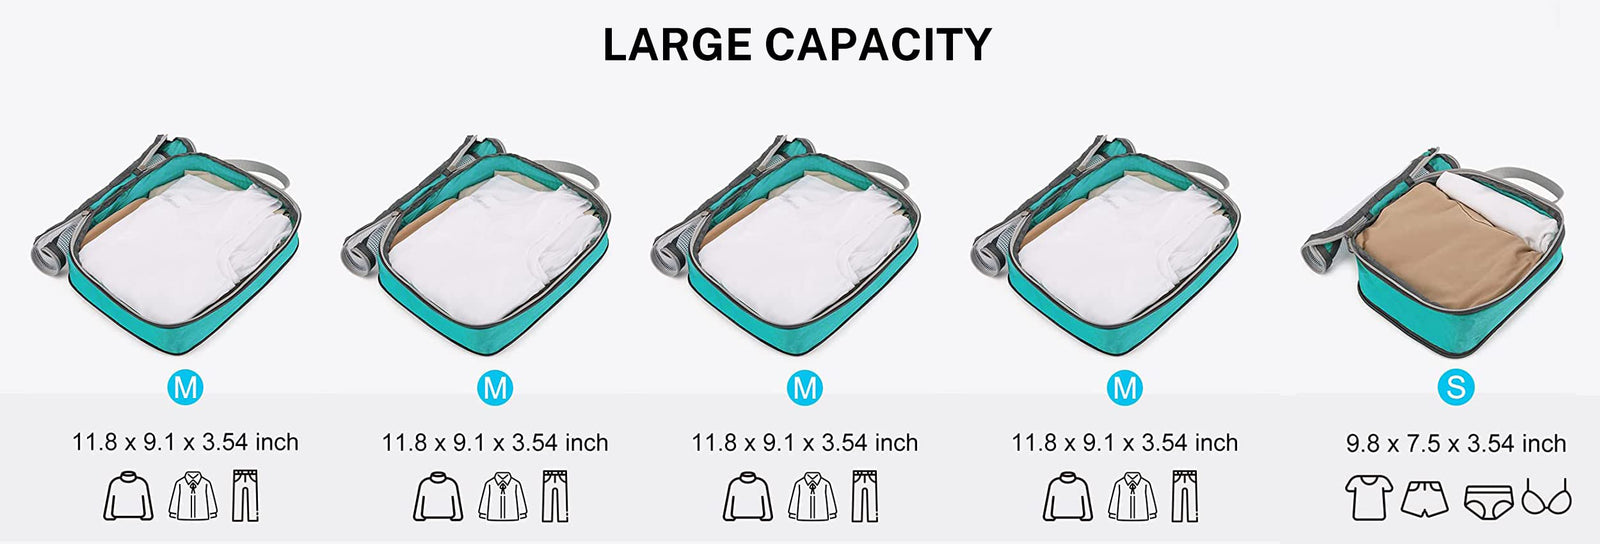 Capacity of Gonex Compression Packing Cubes